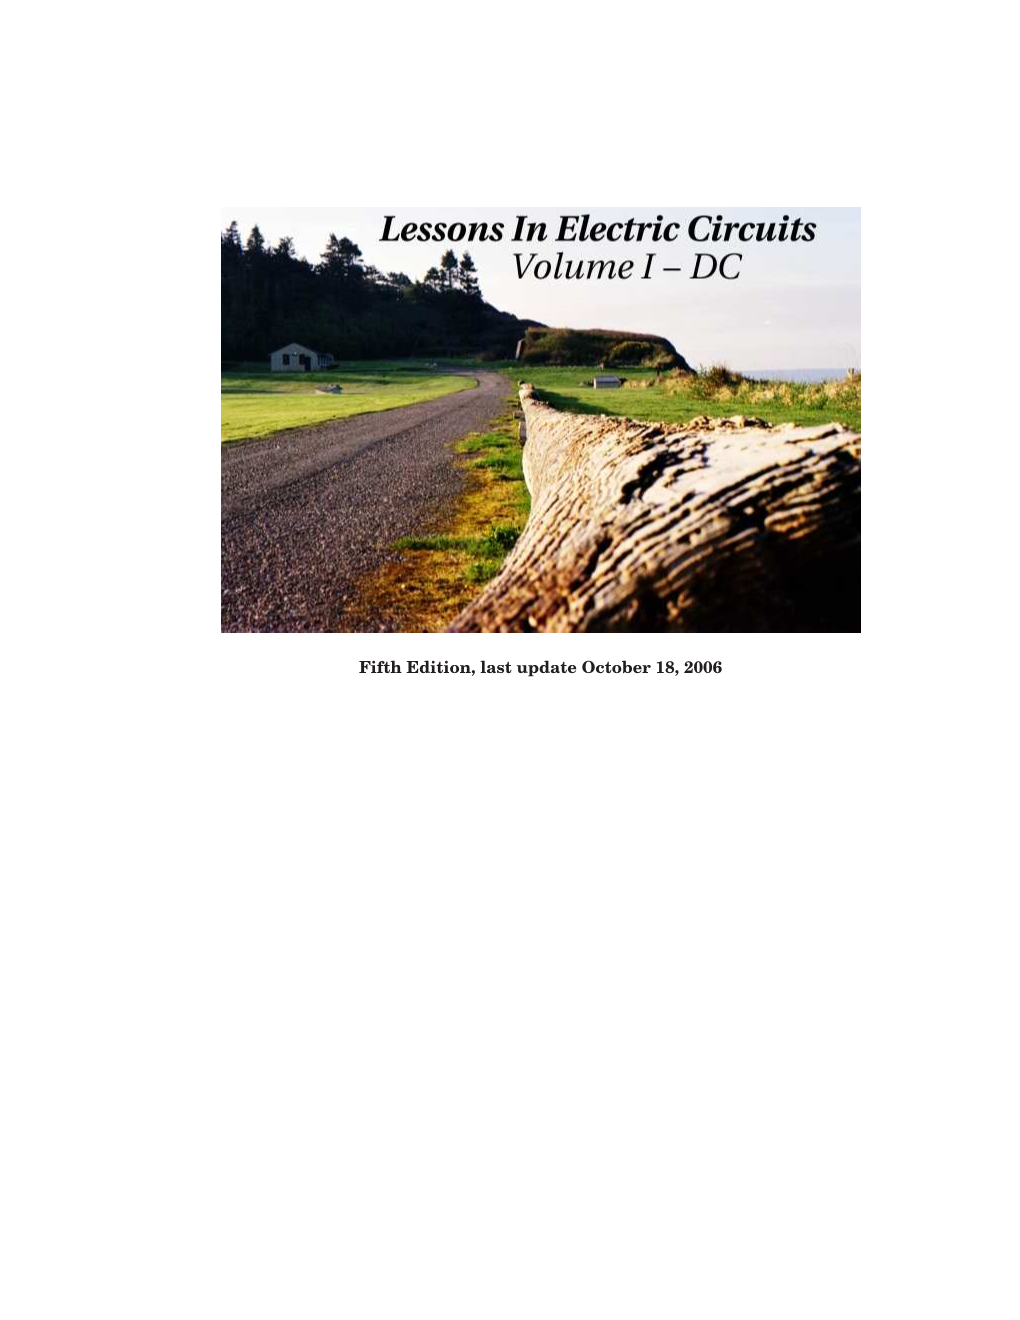 "Lessons in Electric Circuits, Volume I